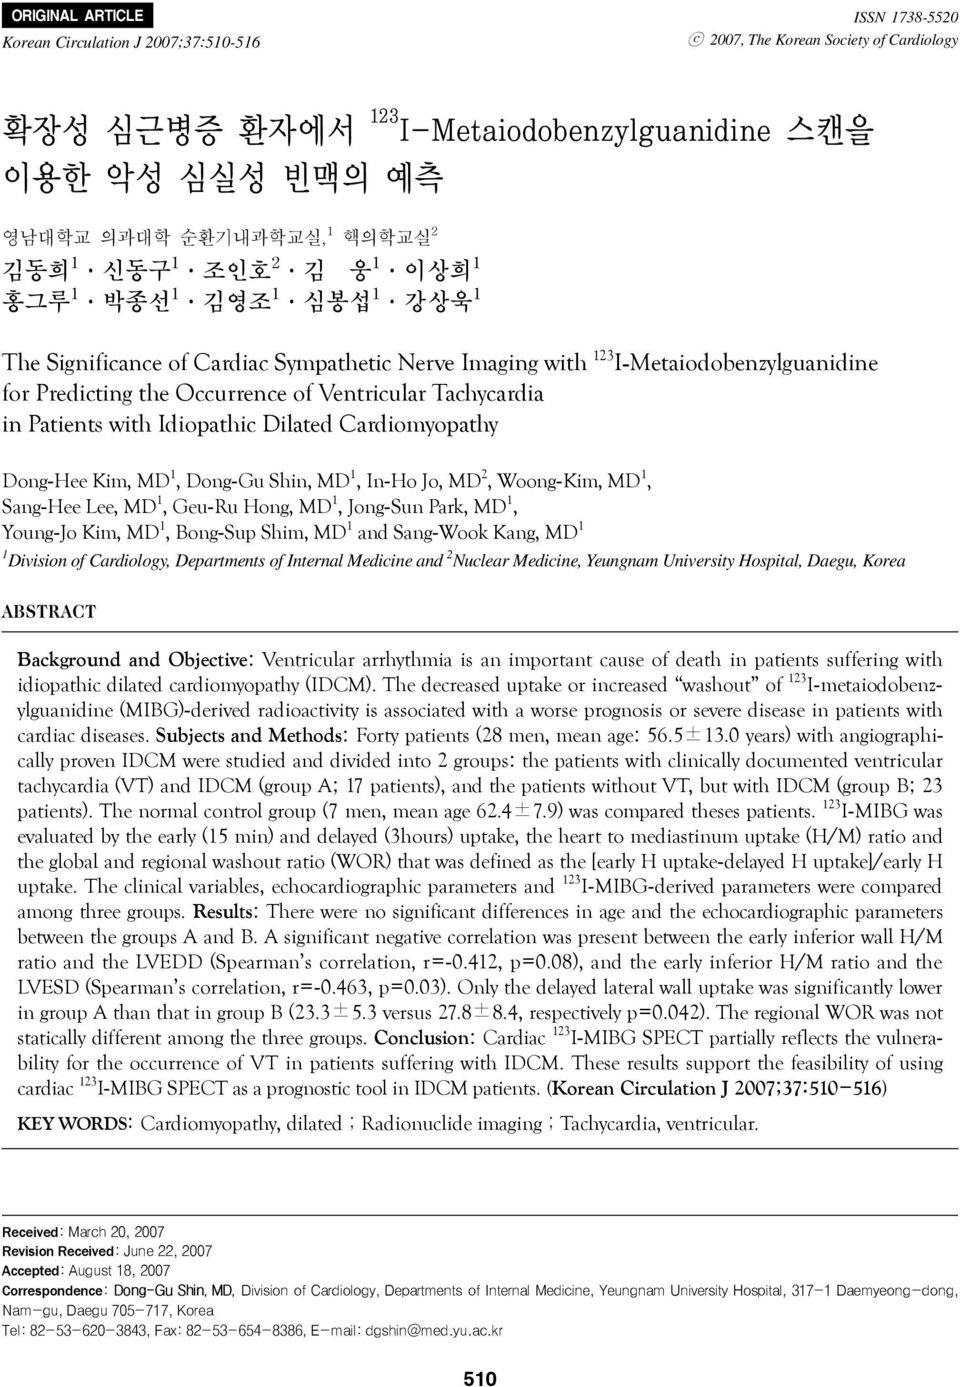 Ventricular Tachycardia in Patients with Idiopathic Dilated Cardiomyopathy Dong-Hee Kim, MD 1, Dong-Gu Shin, MD 1, In-Ho Jo, MD 2, Woong-Kim, MD 1, Sang-Hee Lee, MD 1, Geu-Ru Hong, MD 1, Jong-Sun